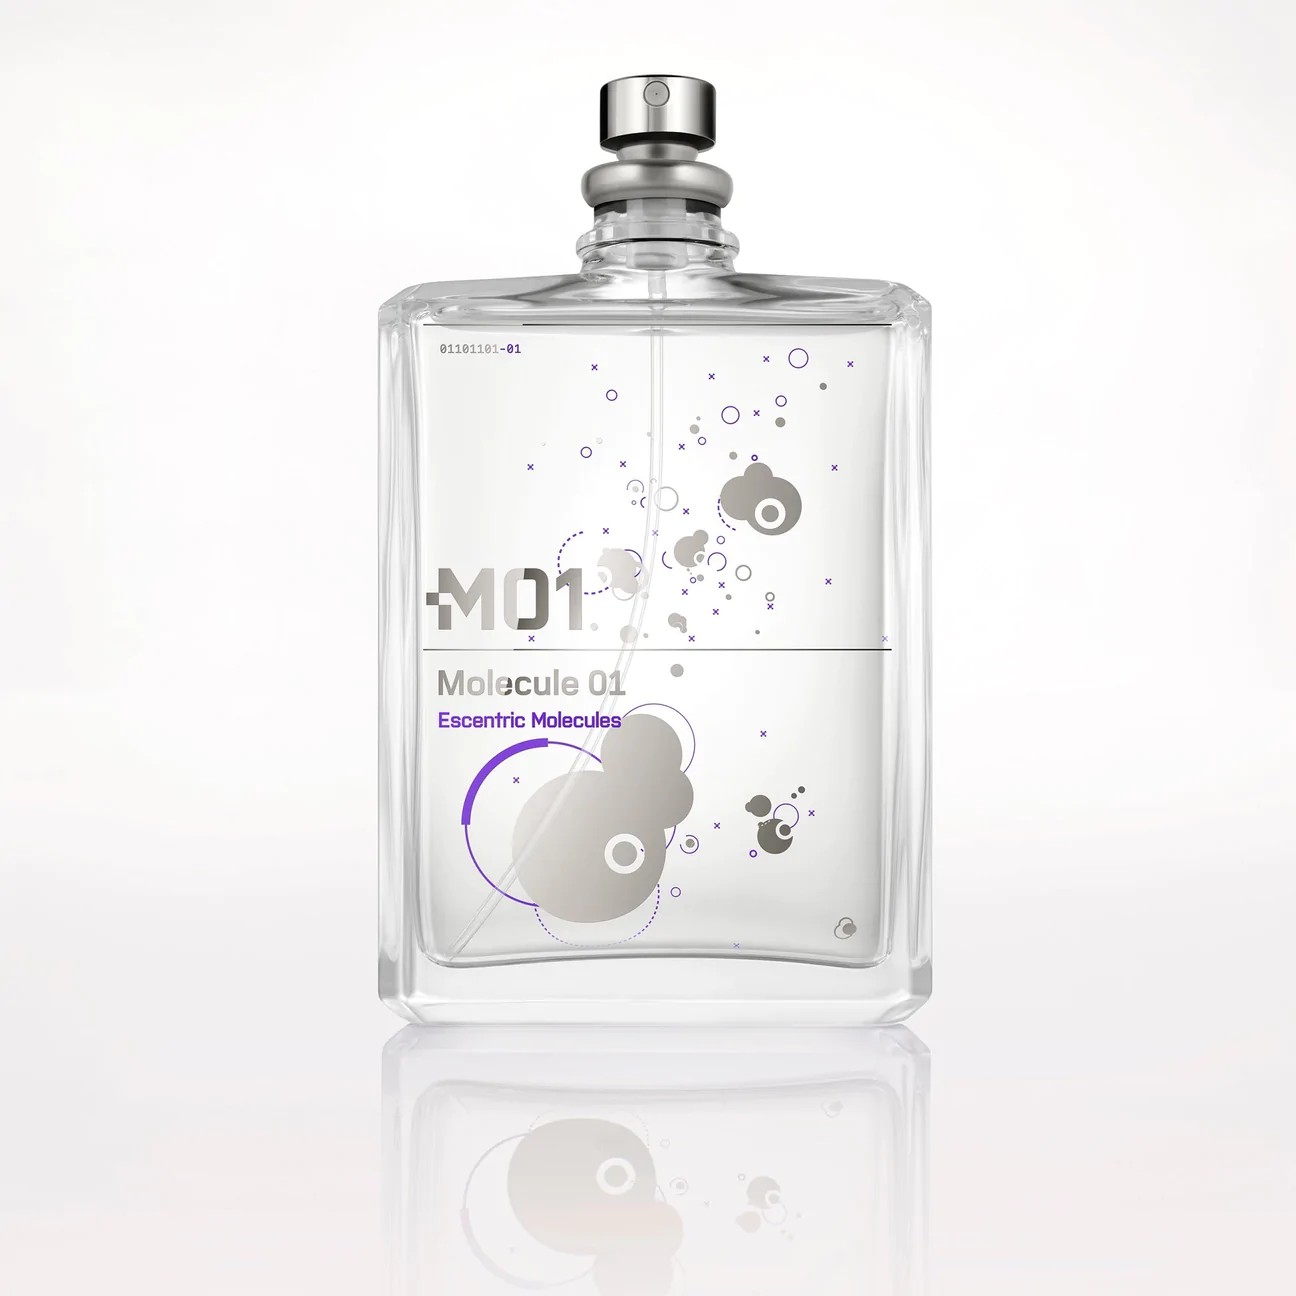 Perfume Review: Molecule + by Escentric Molecules – The Candy